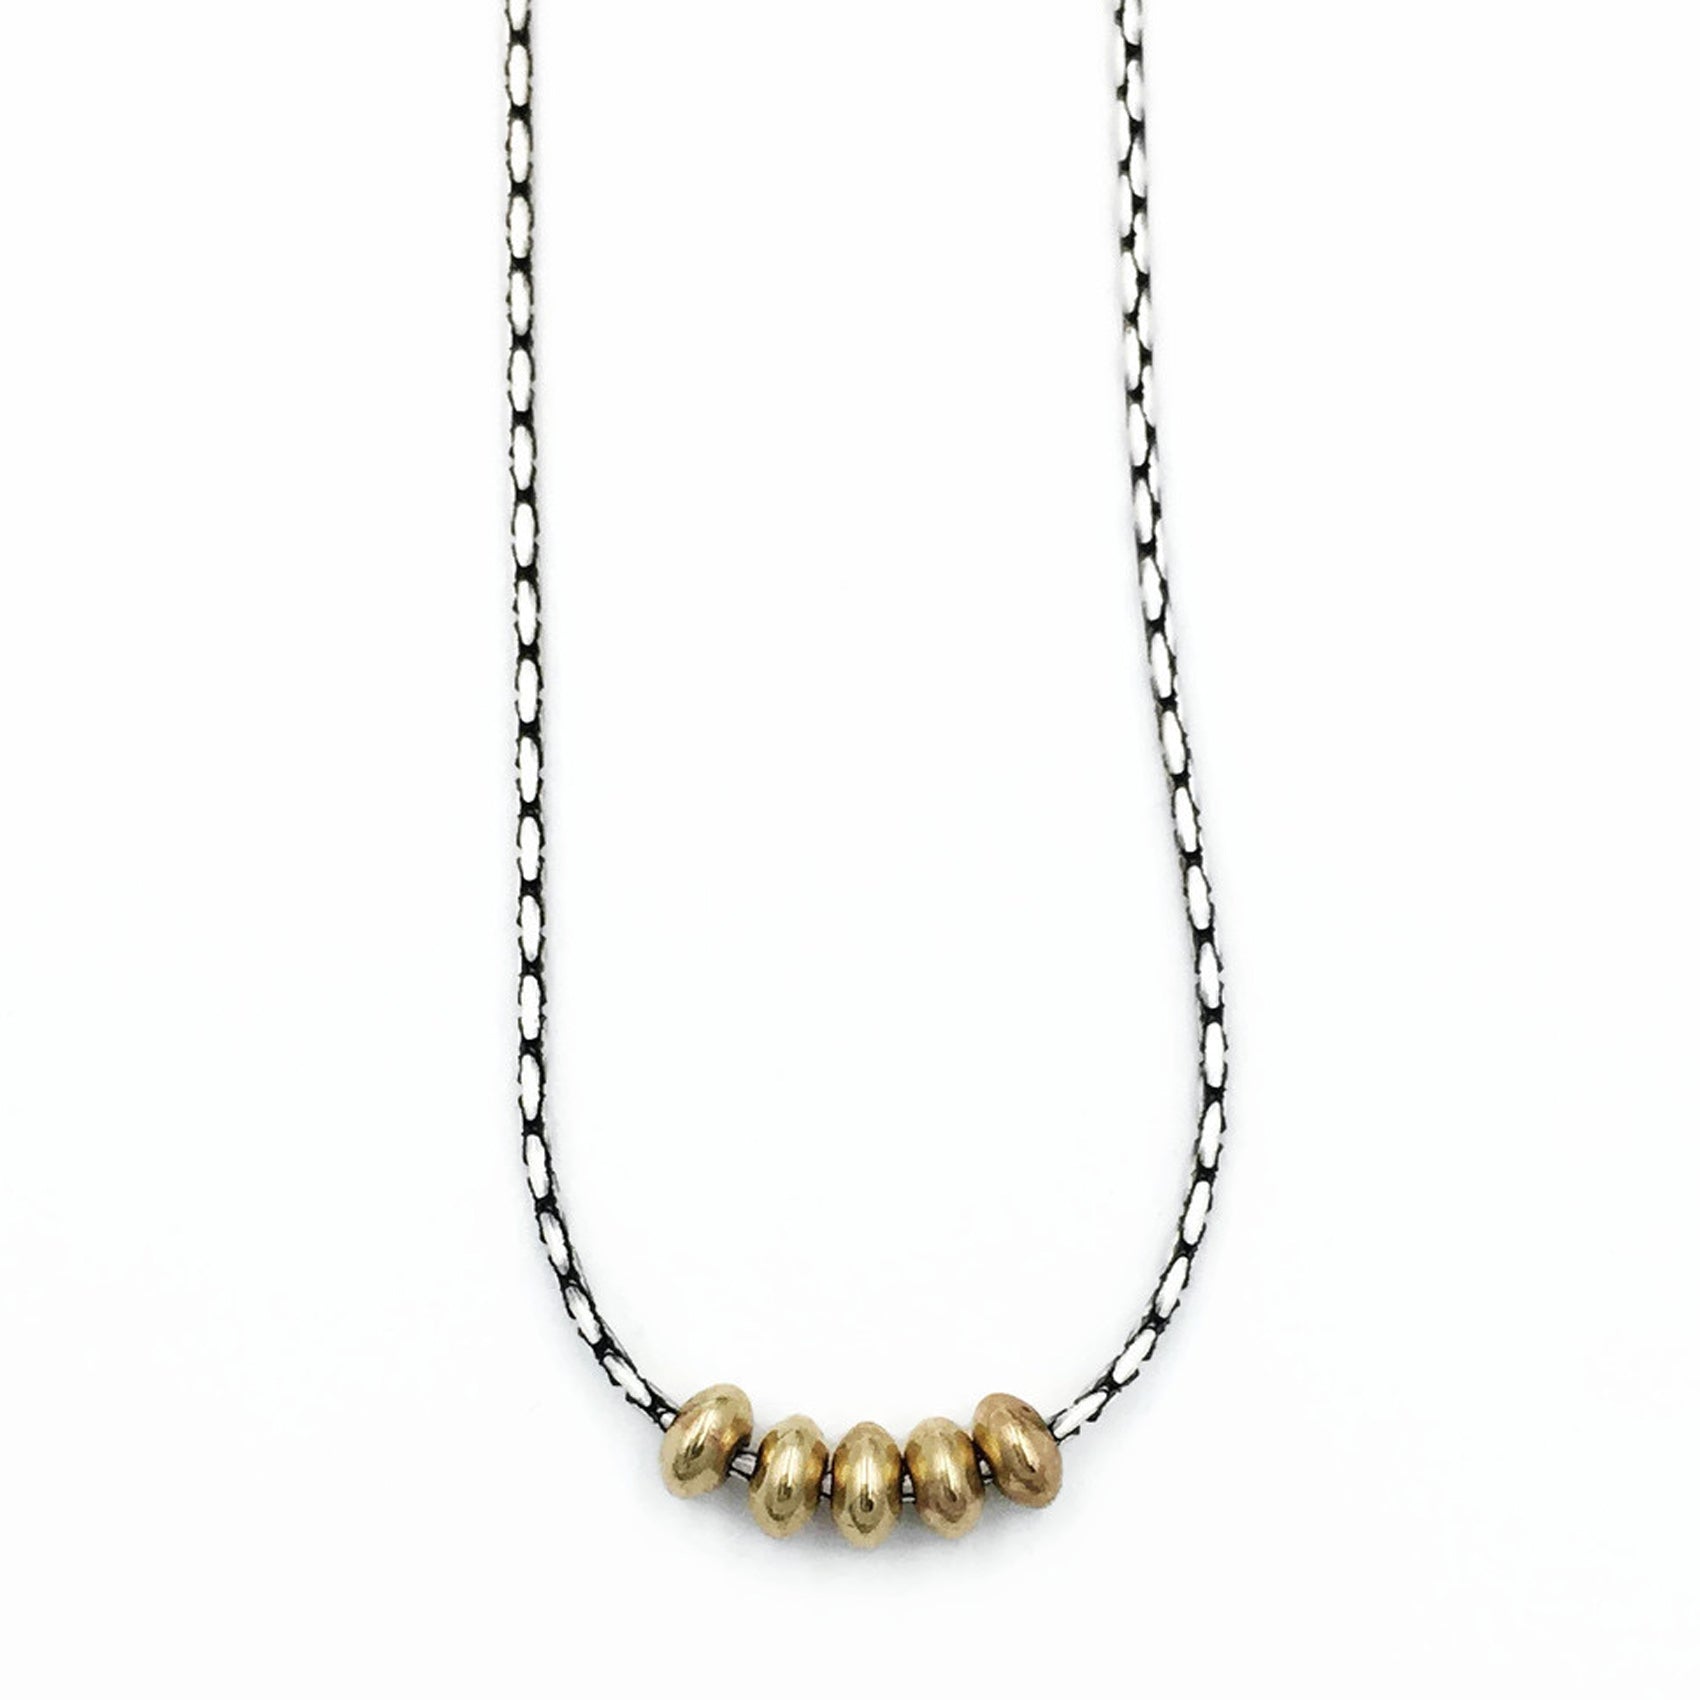 Sterling silver necklace with sparkles of gold filled beads